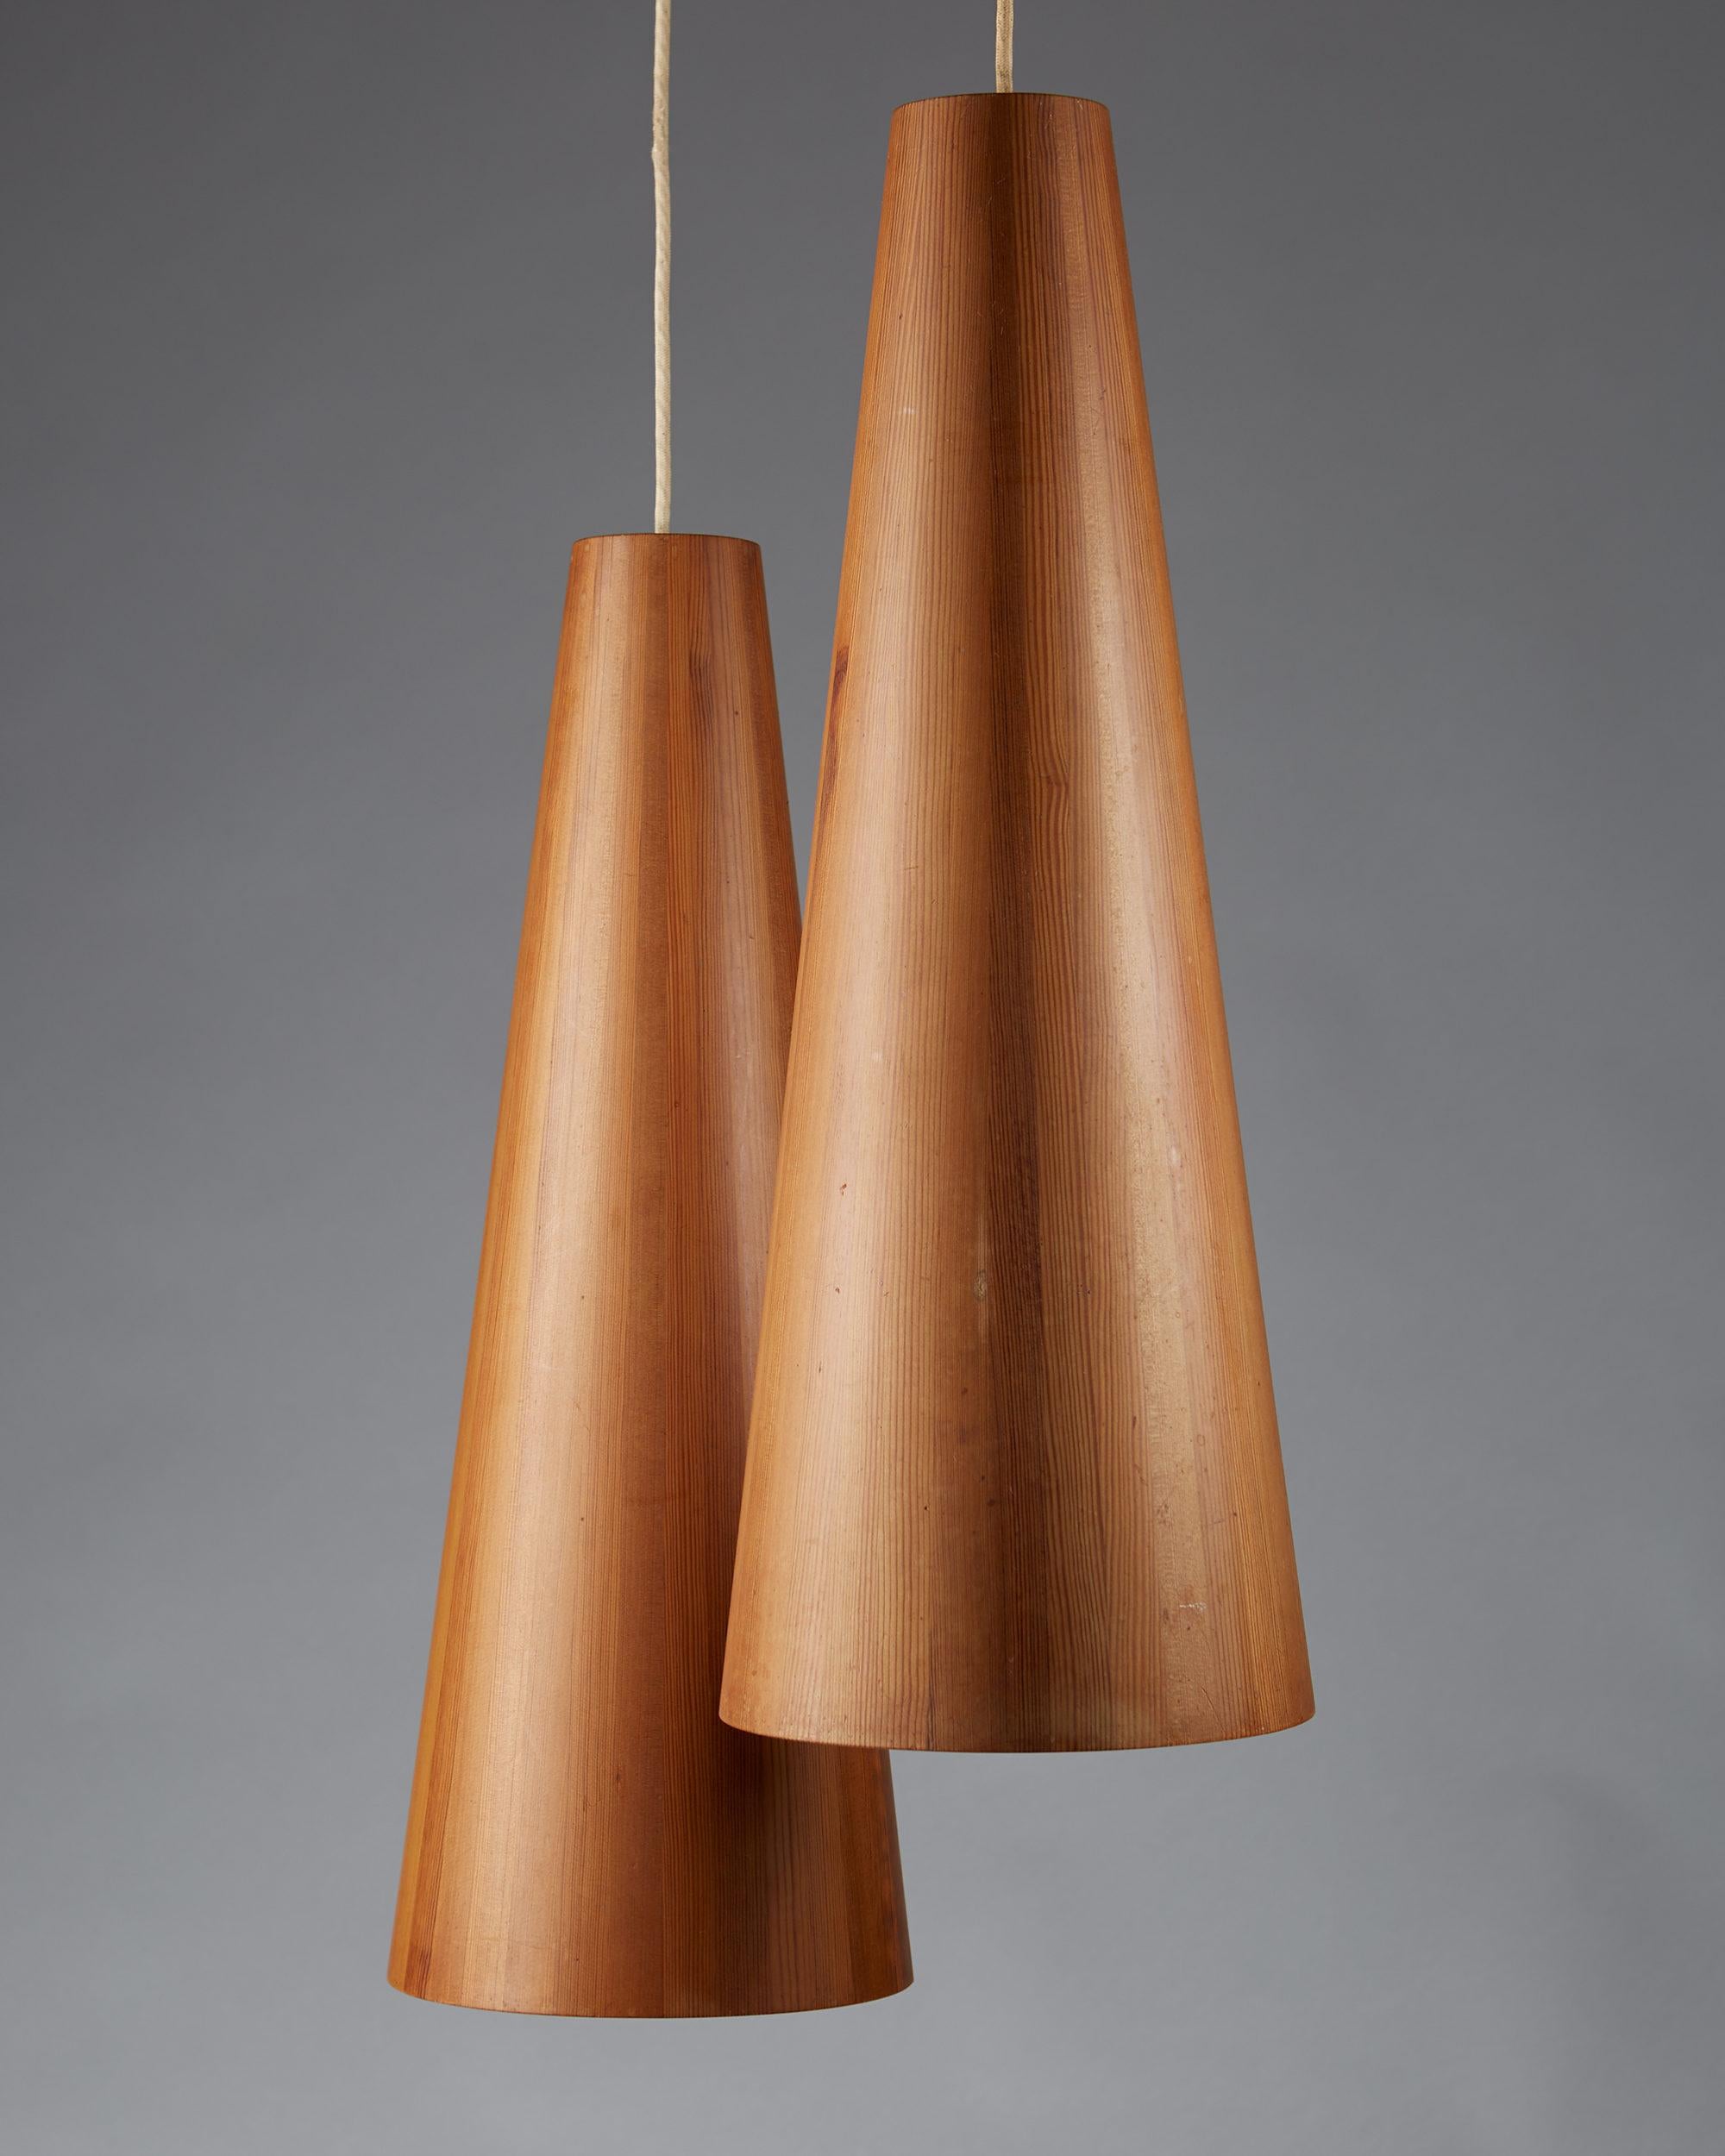 Danish Pair of Ceiling Lamps Designed by Jörgen Wolff for Christian A. Wolff, Denmark